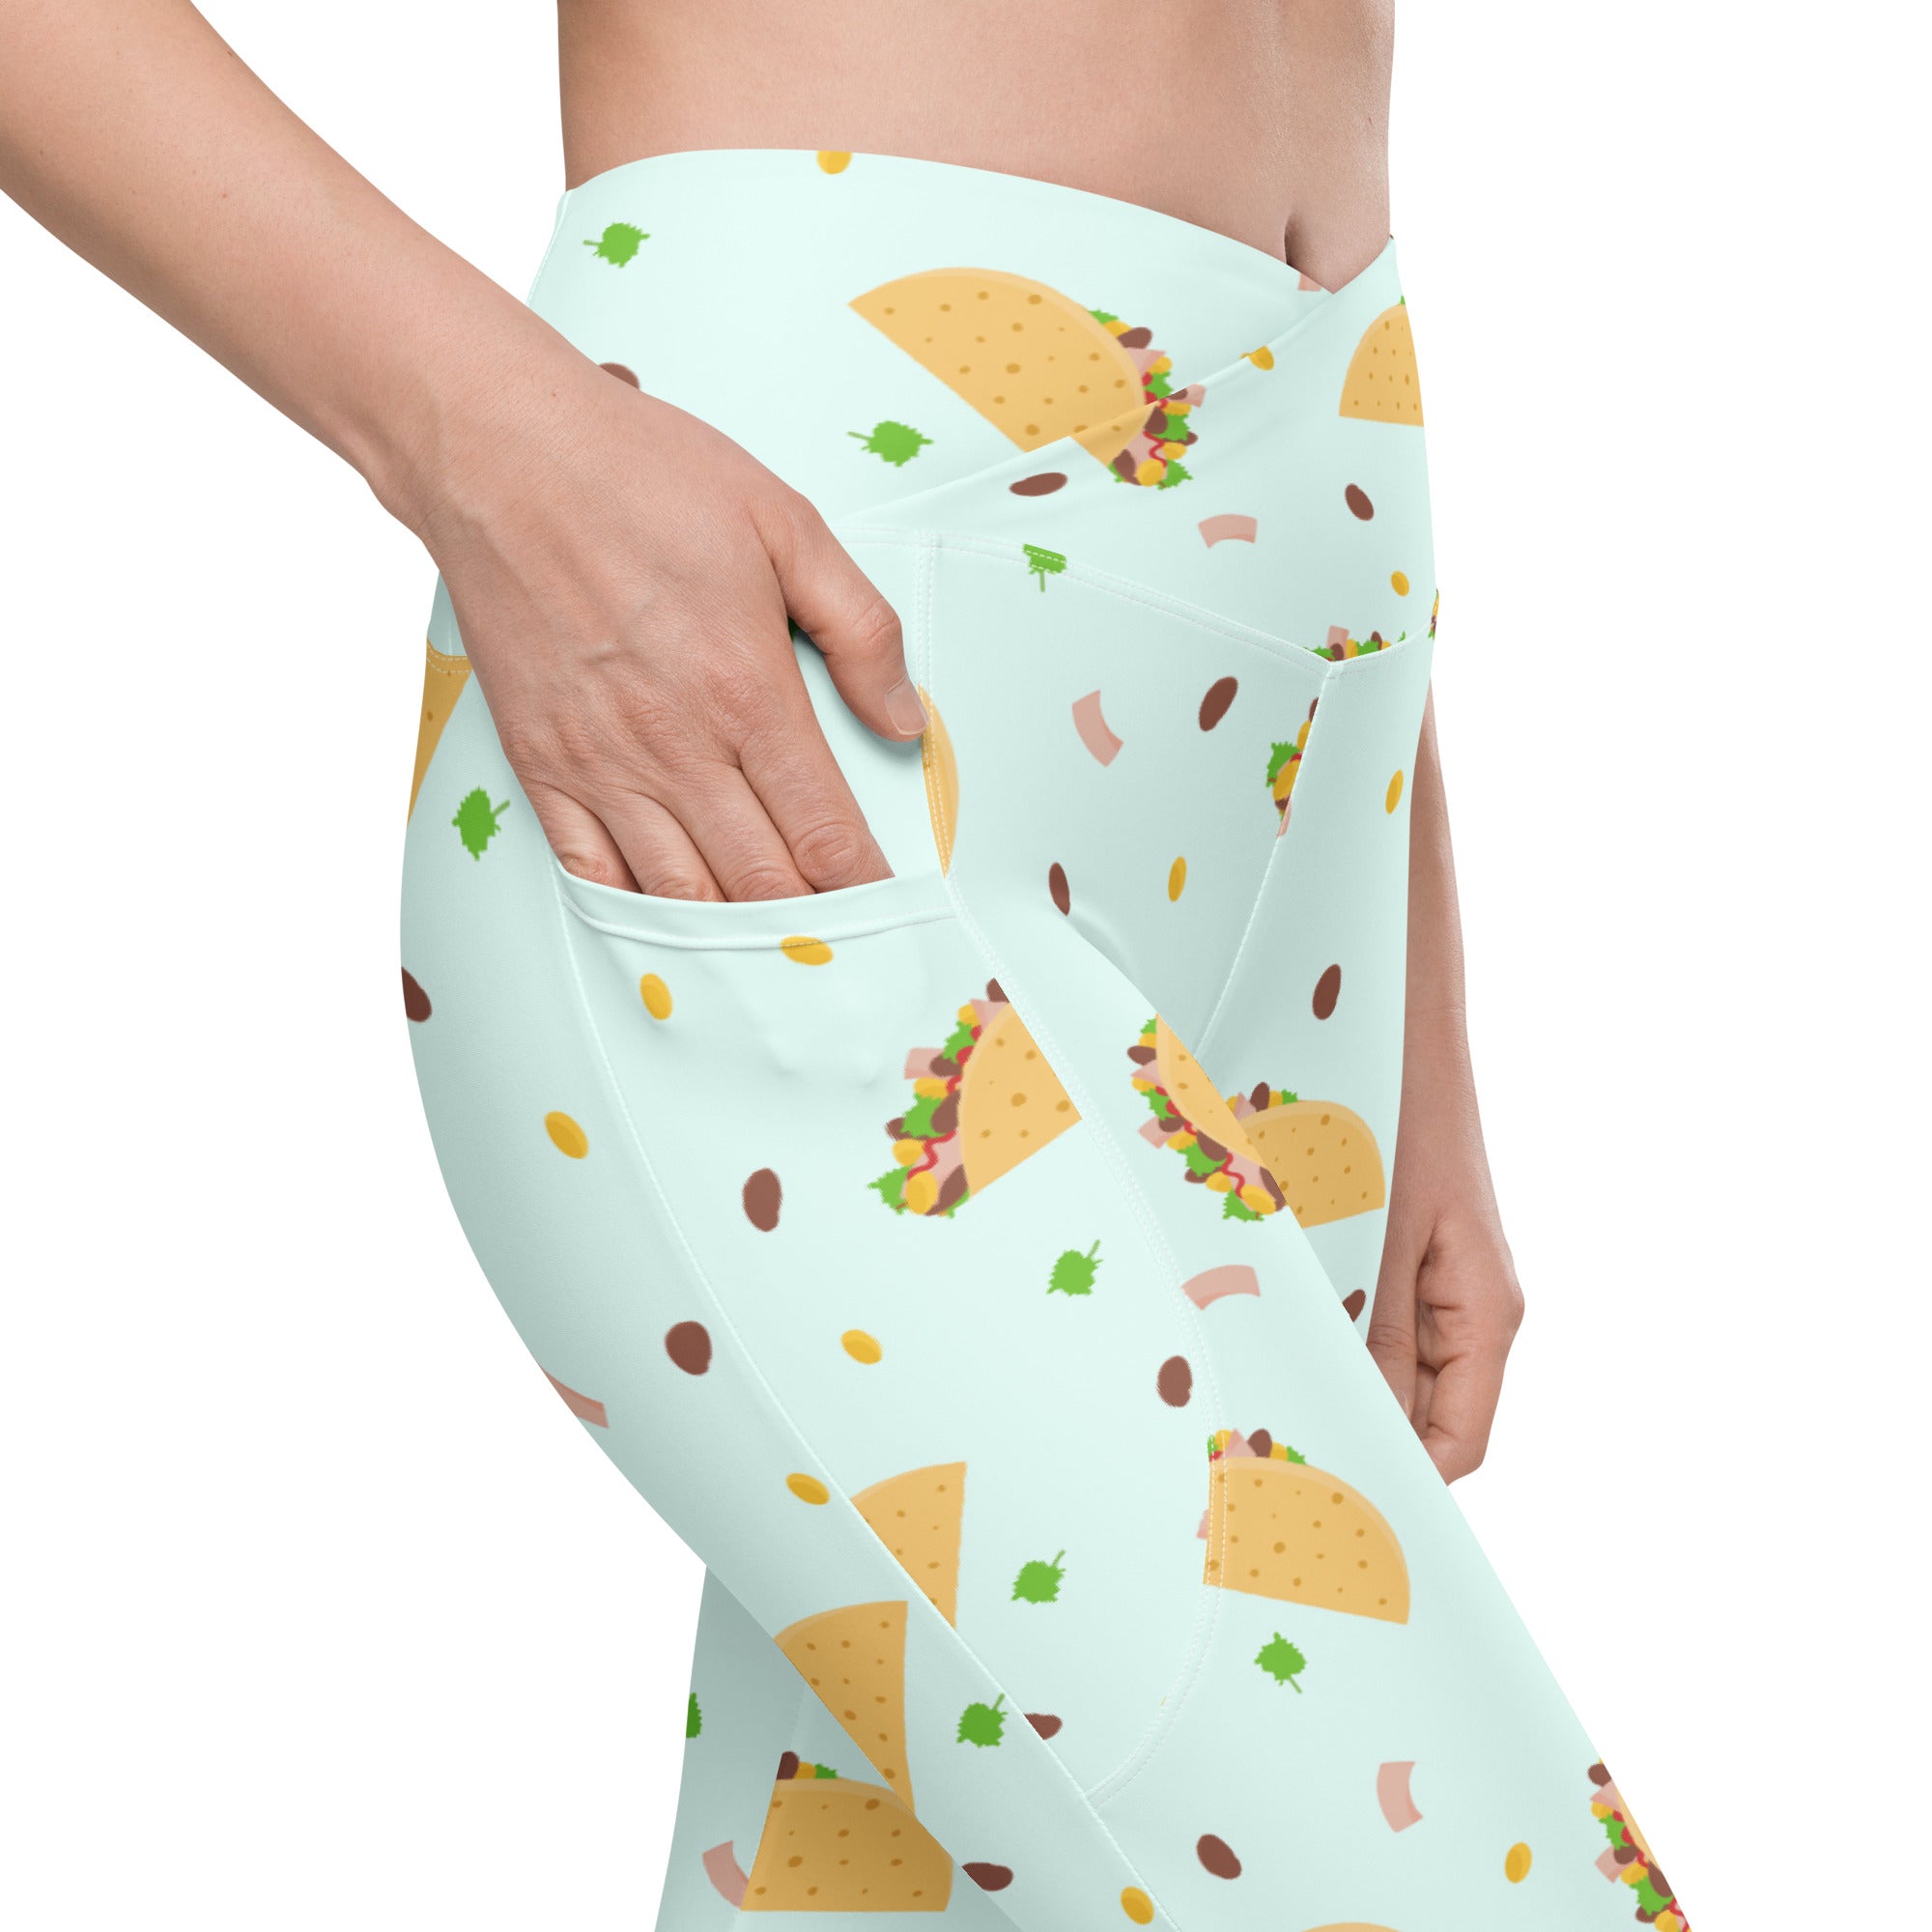 Tacos Crossover Leggings With Pockets